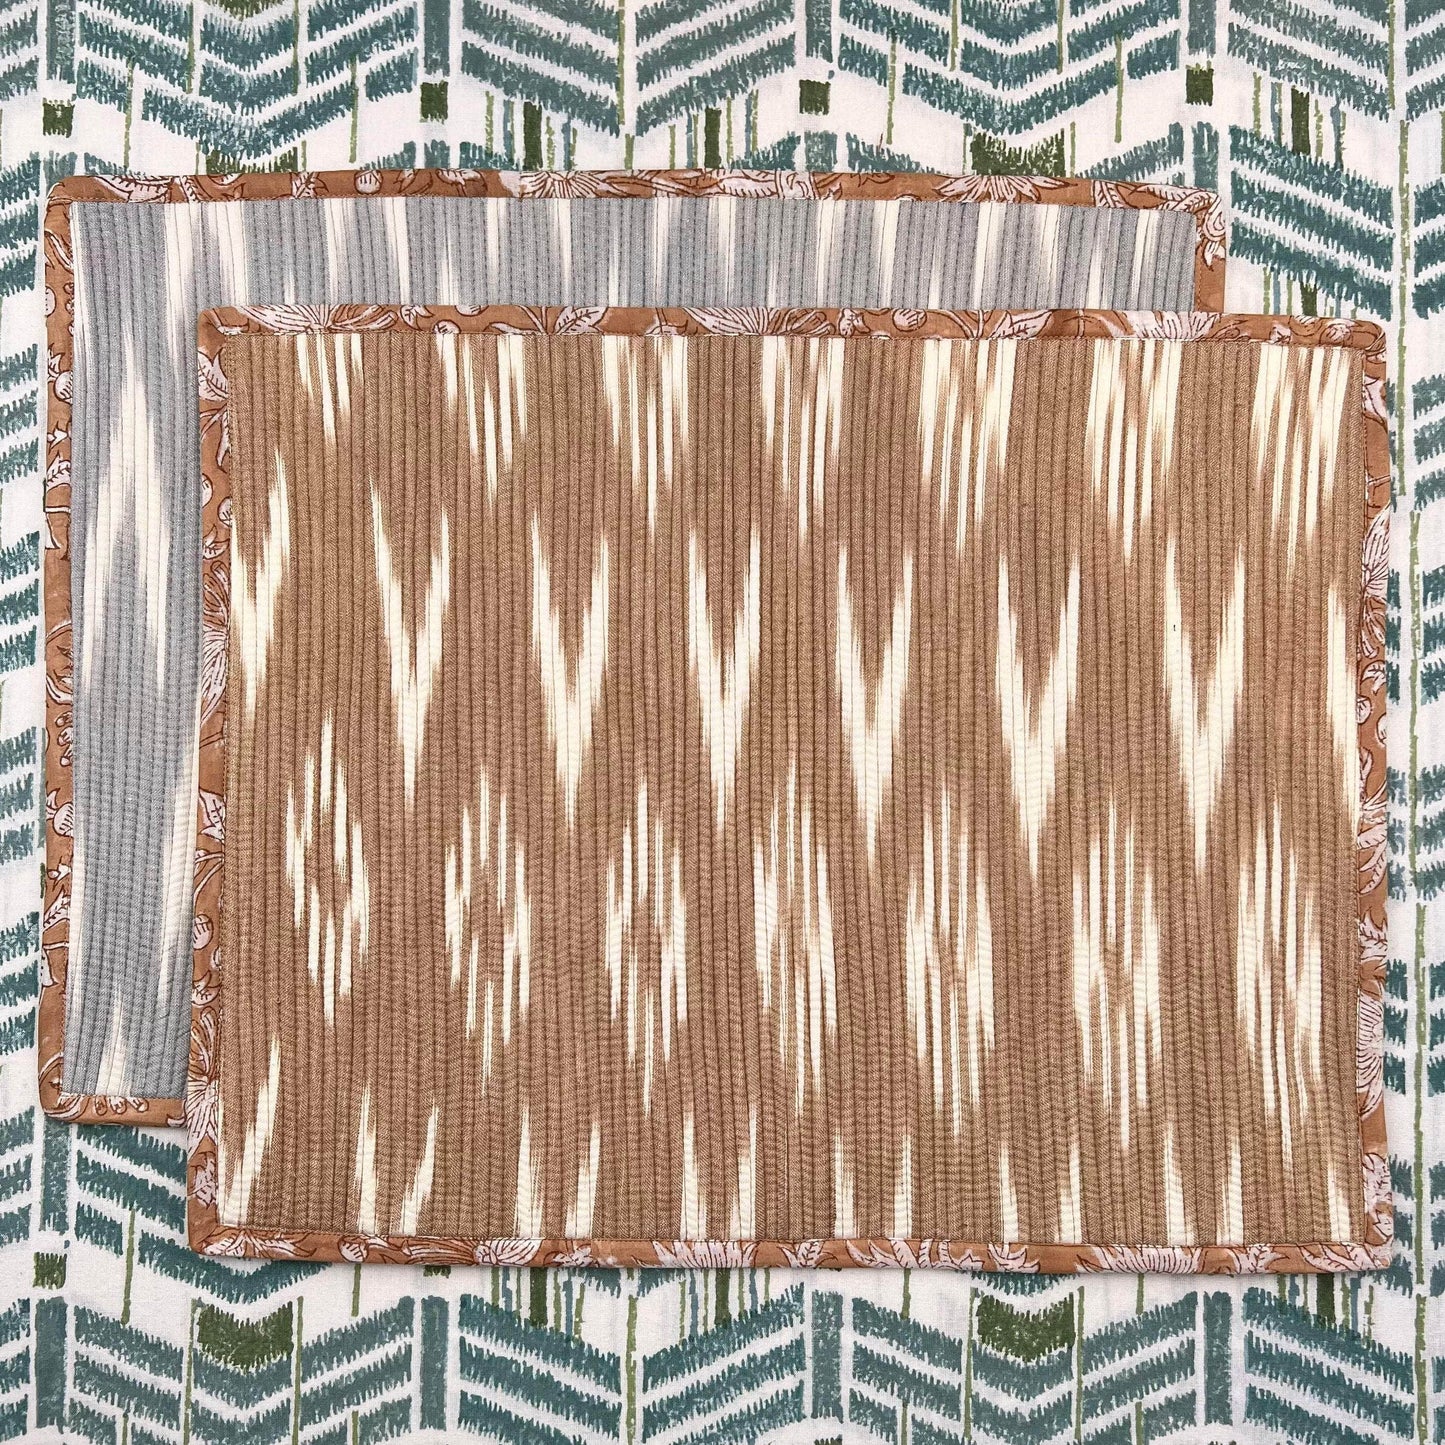 The Ikat Breakfast Placemat (set of 4) Camel/Grey